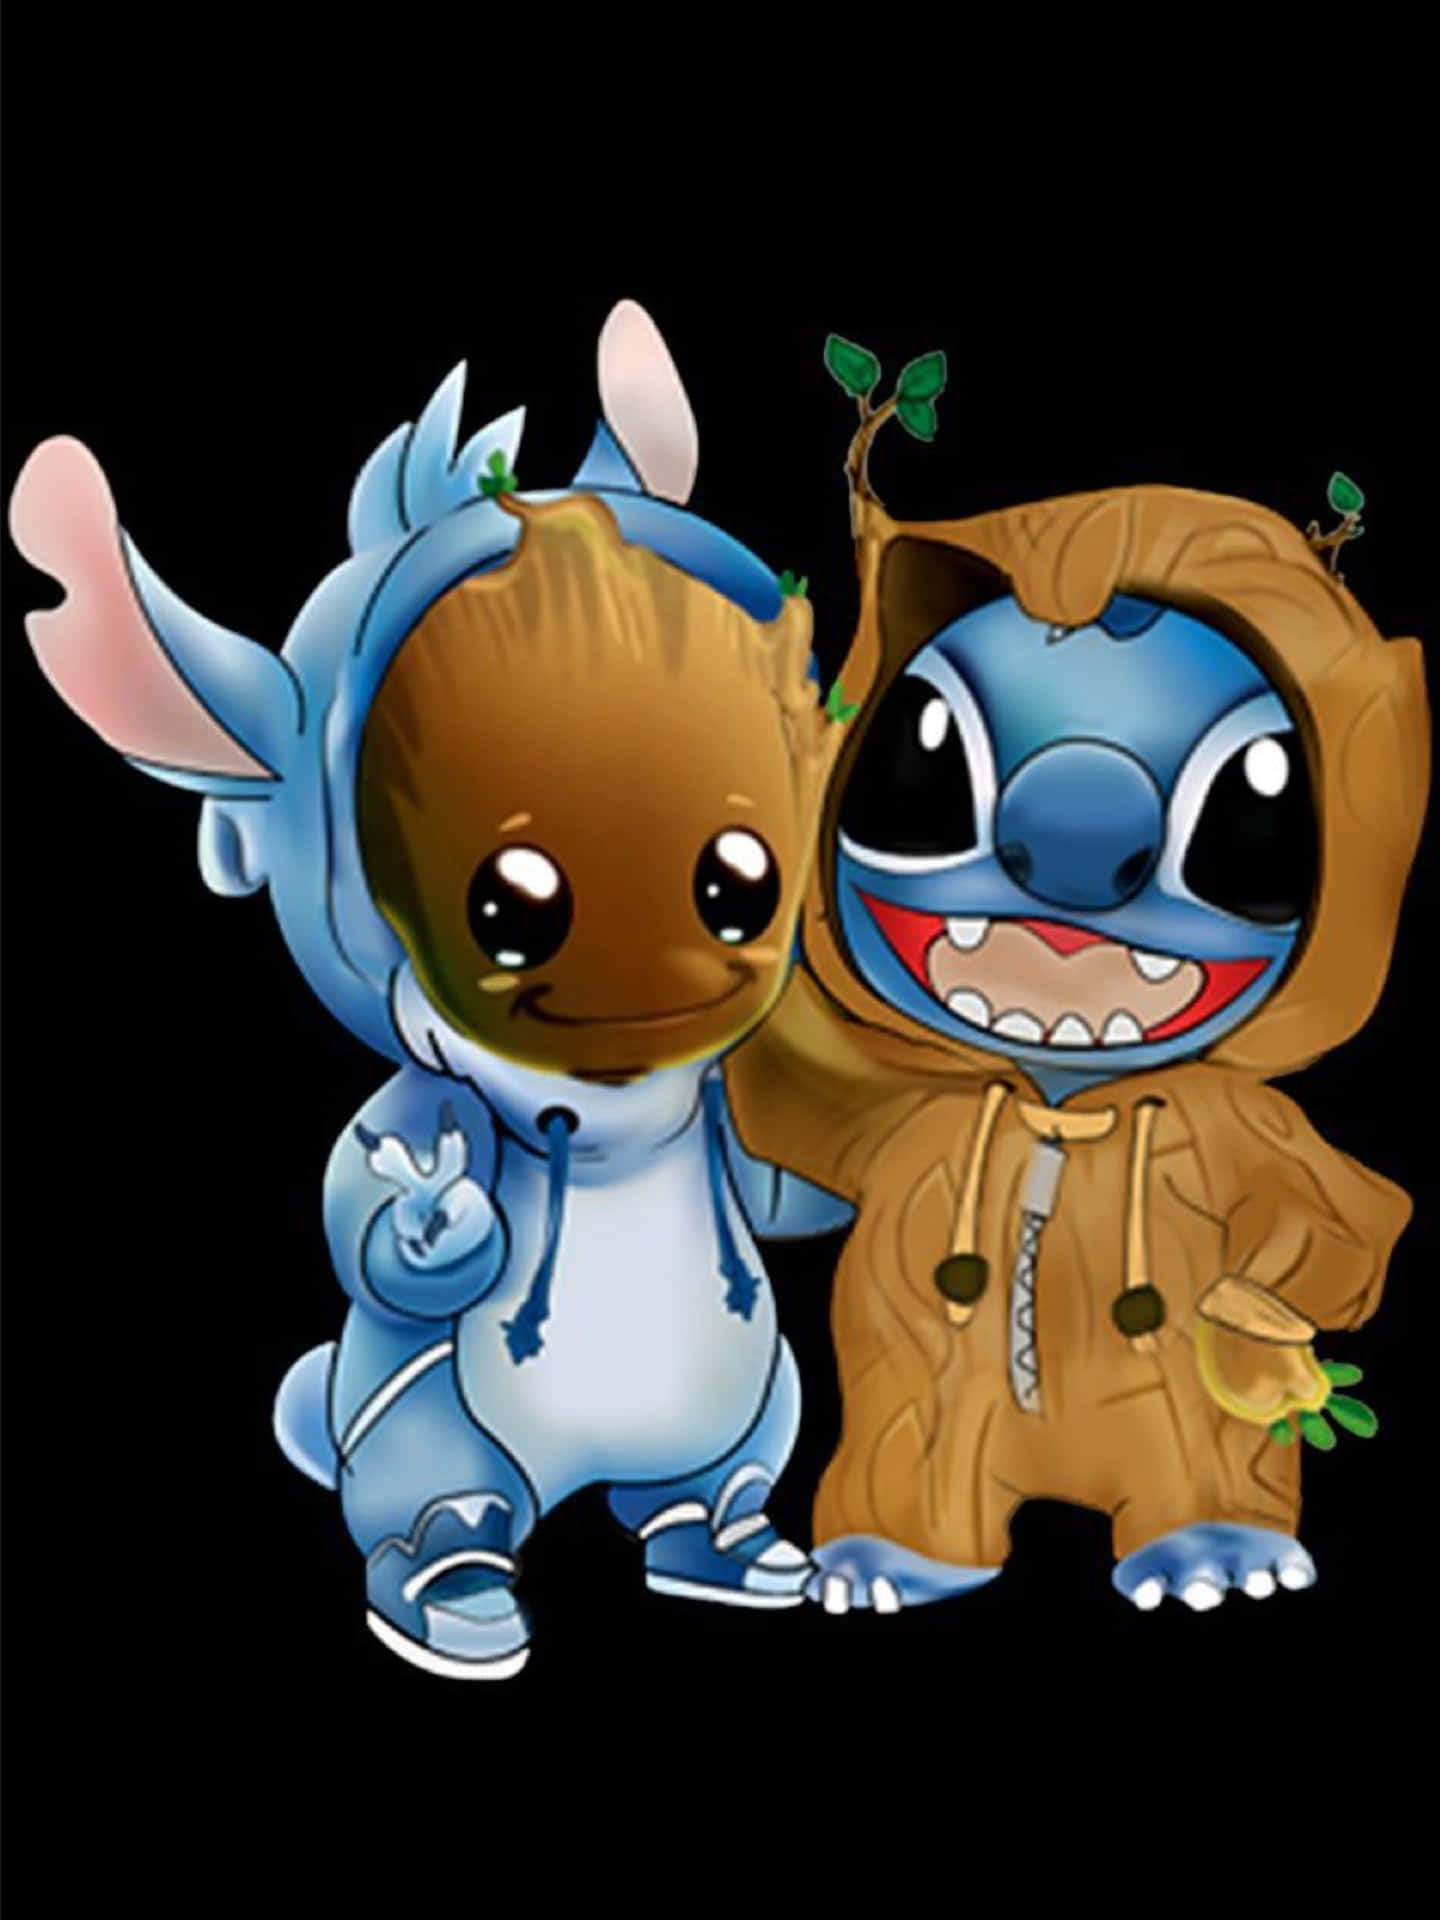 "Fall in love with Baby Stitch" Wallpaper